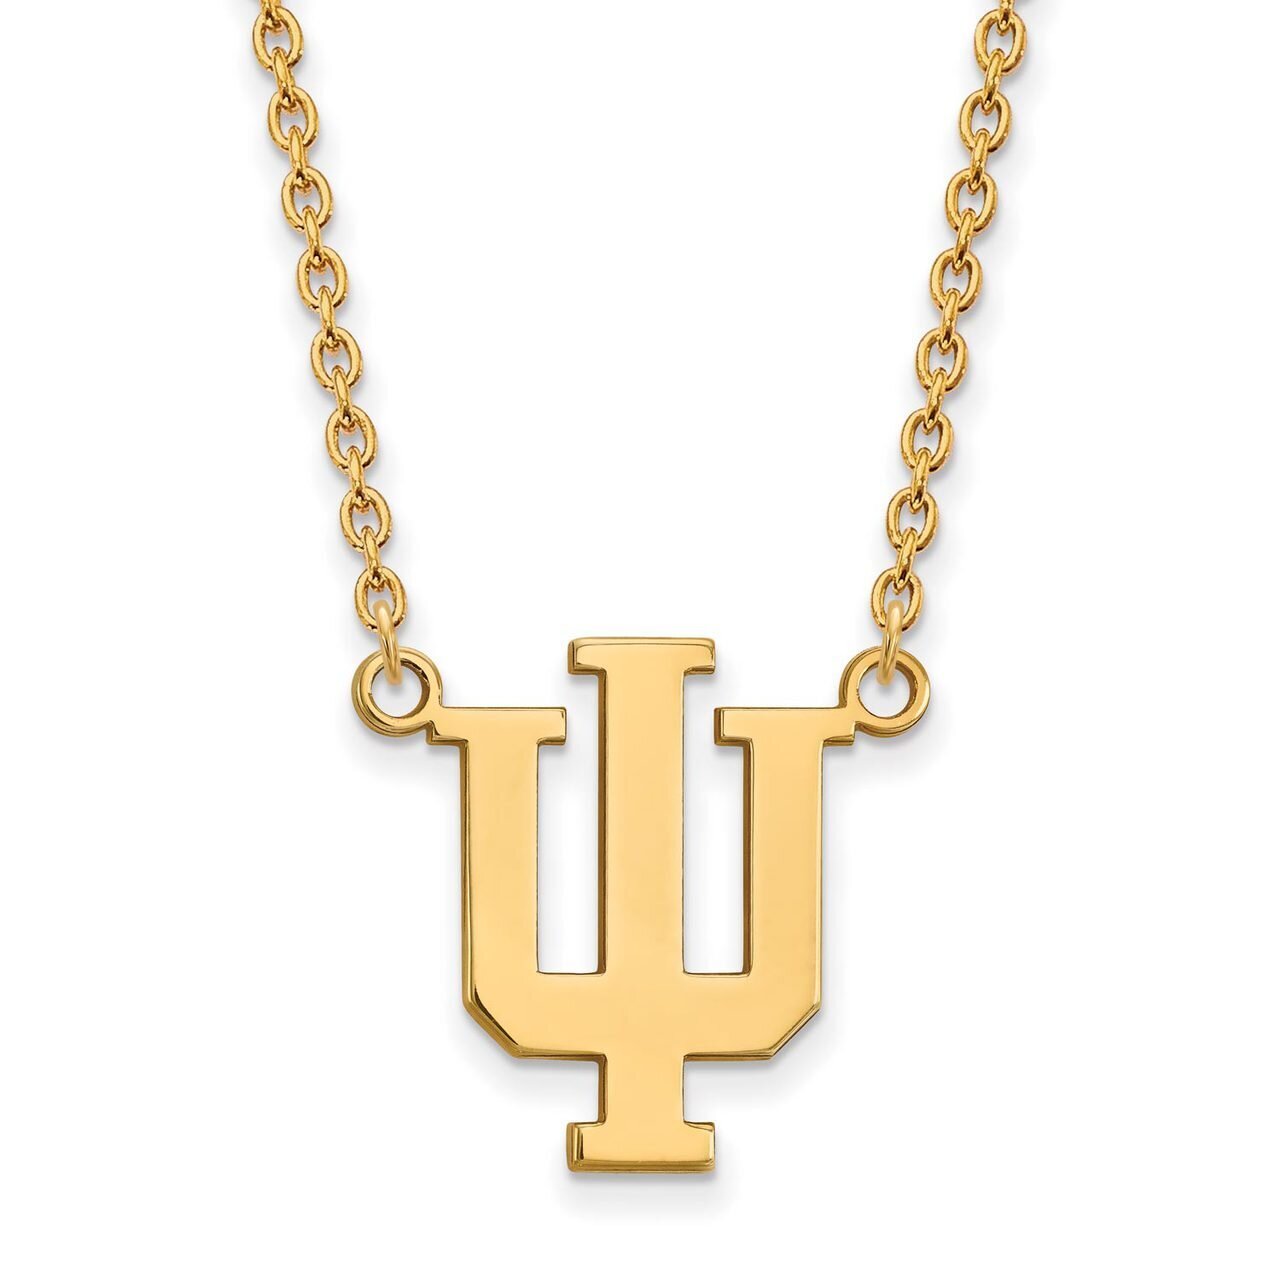 Indiana University Large Pendant with Chain Necklace Gold-plated Silver GP016IU-18